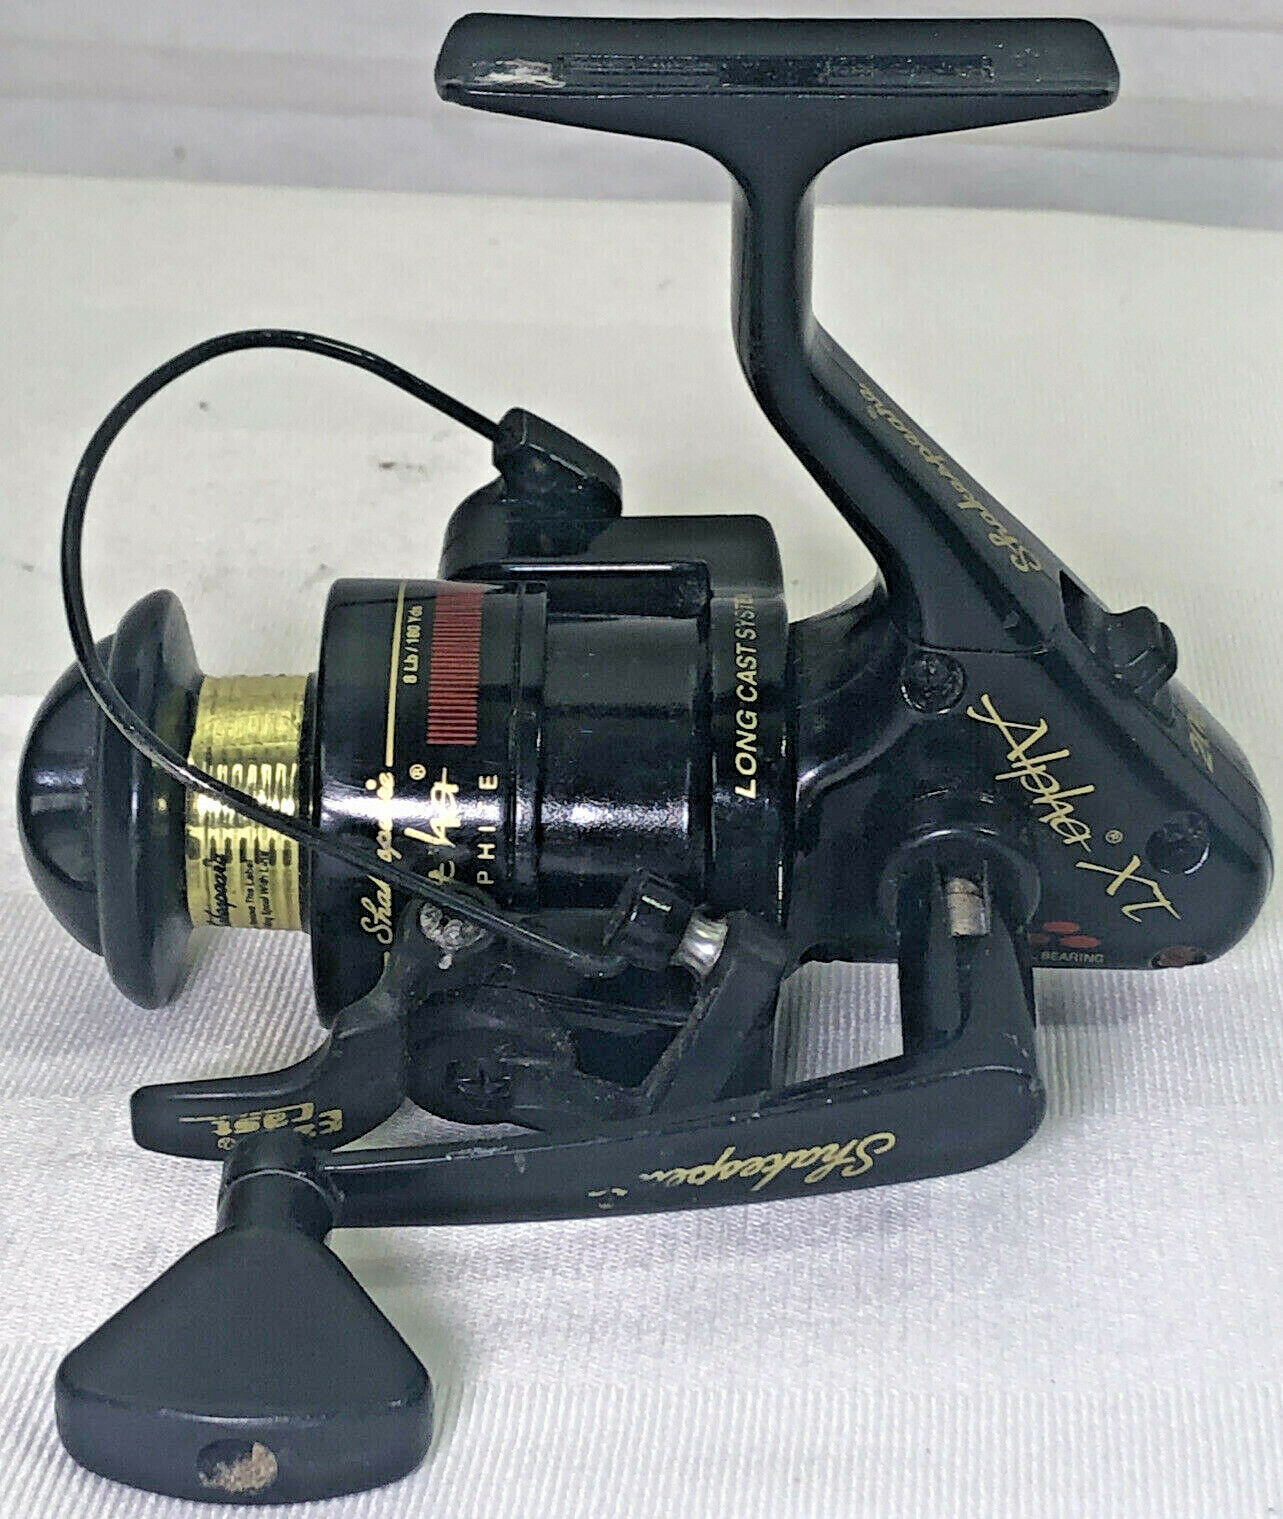 Spinning Reels Shakespeare Alpha Xt 200 and 12 similar items